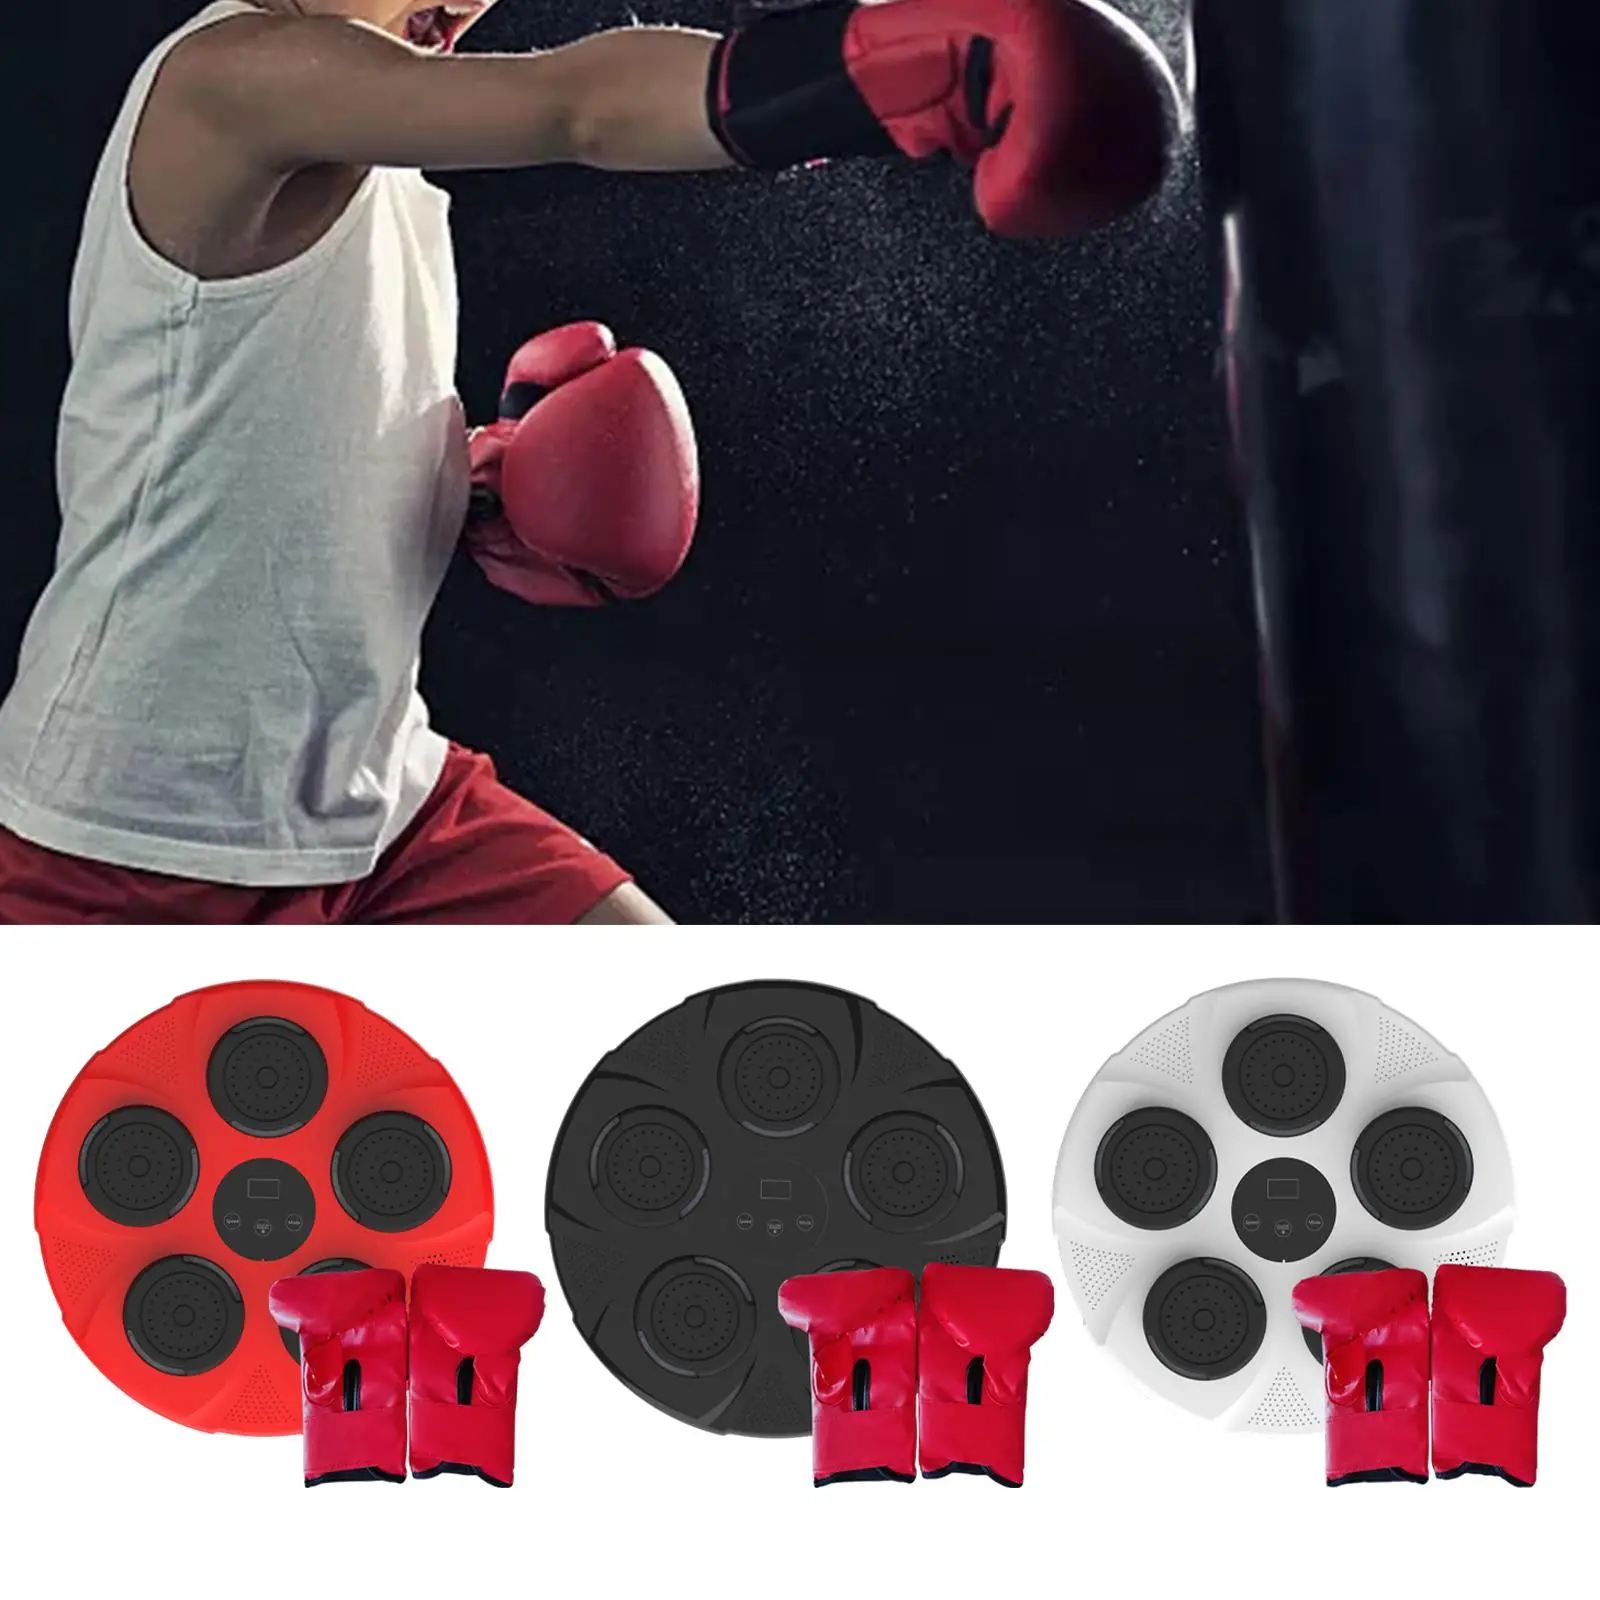 Boxing Machine Electronic Music Boxing Wall Target for Kickboxing Exercise